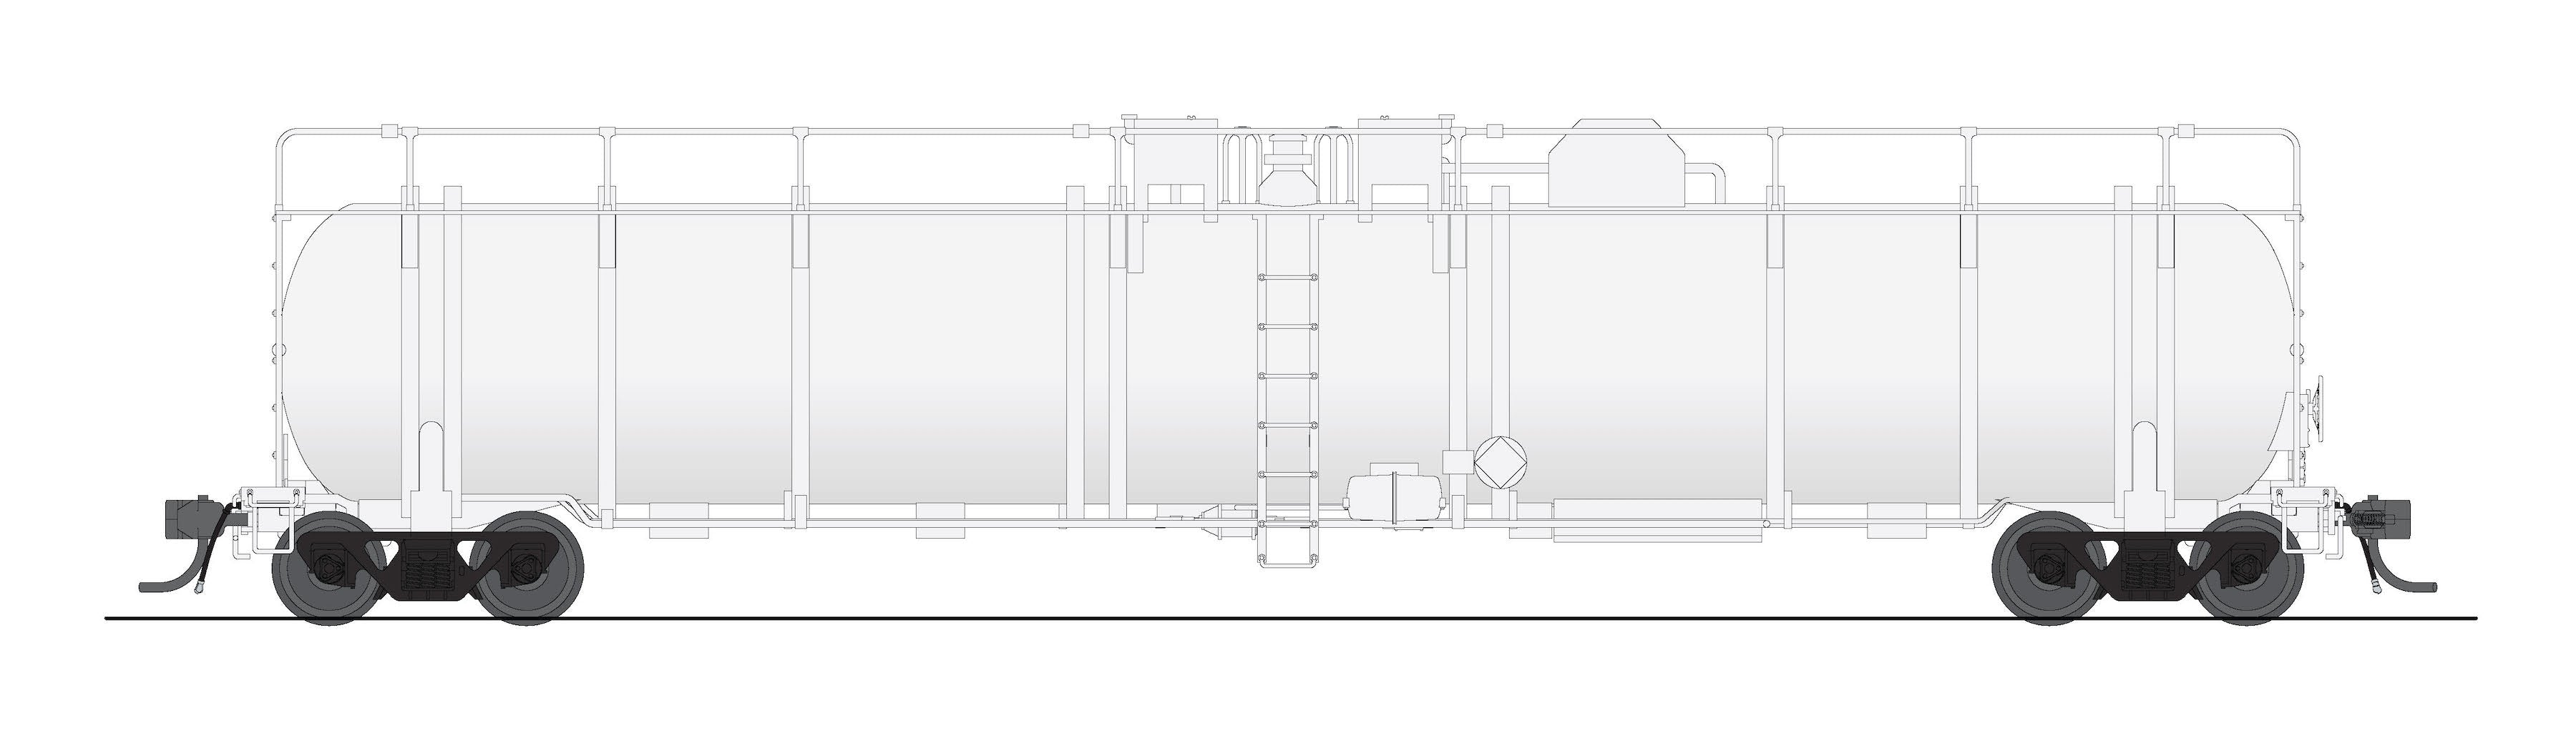 8048 Cryogenic Tank Car, Unlettered, Painted White, Single Car, Type A, HO